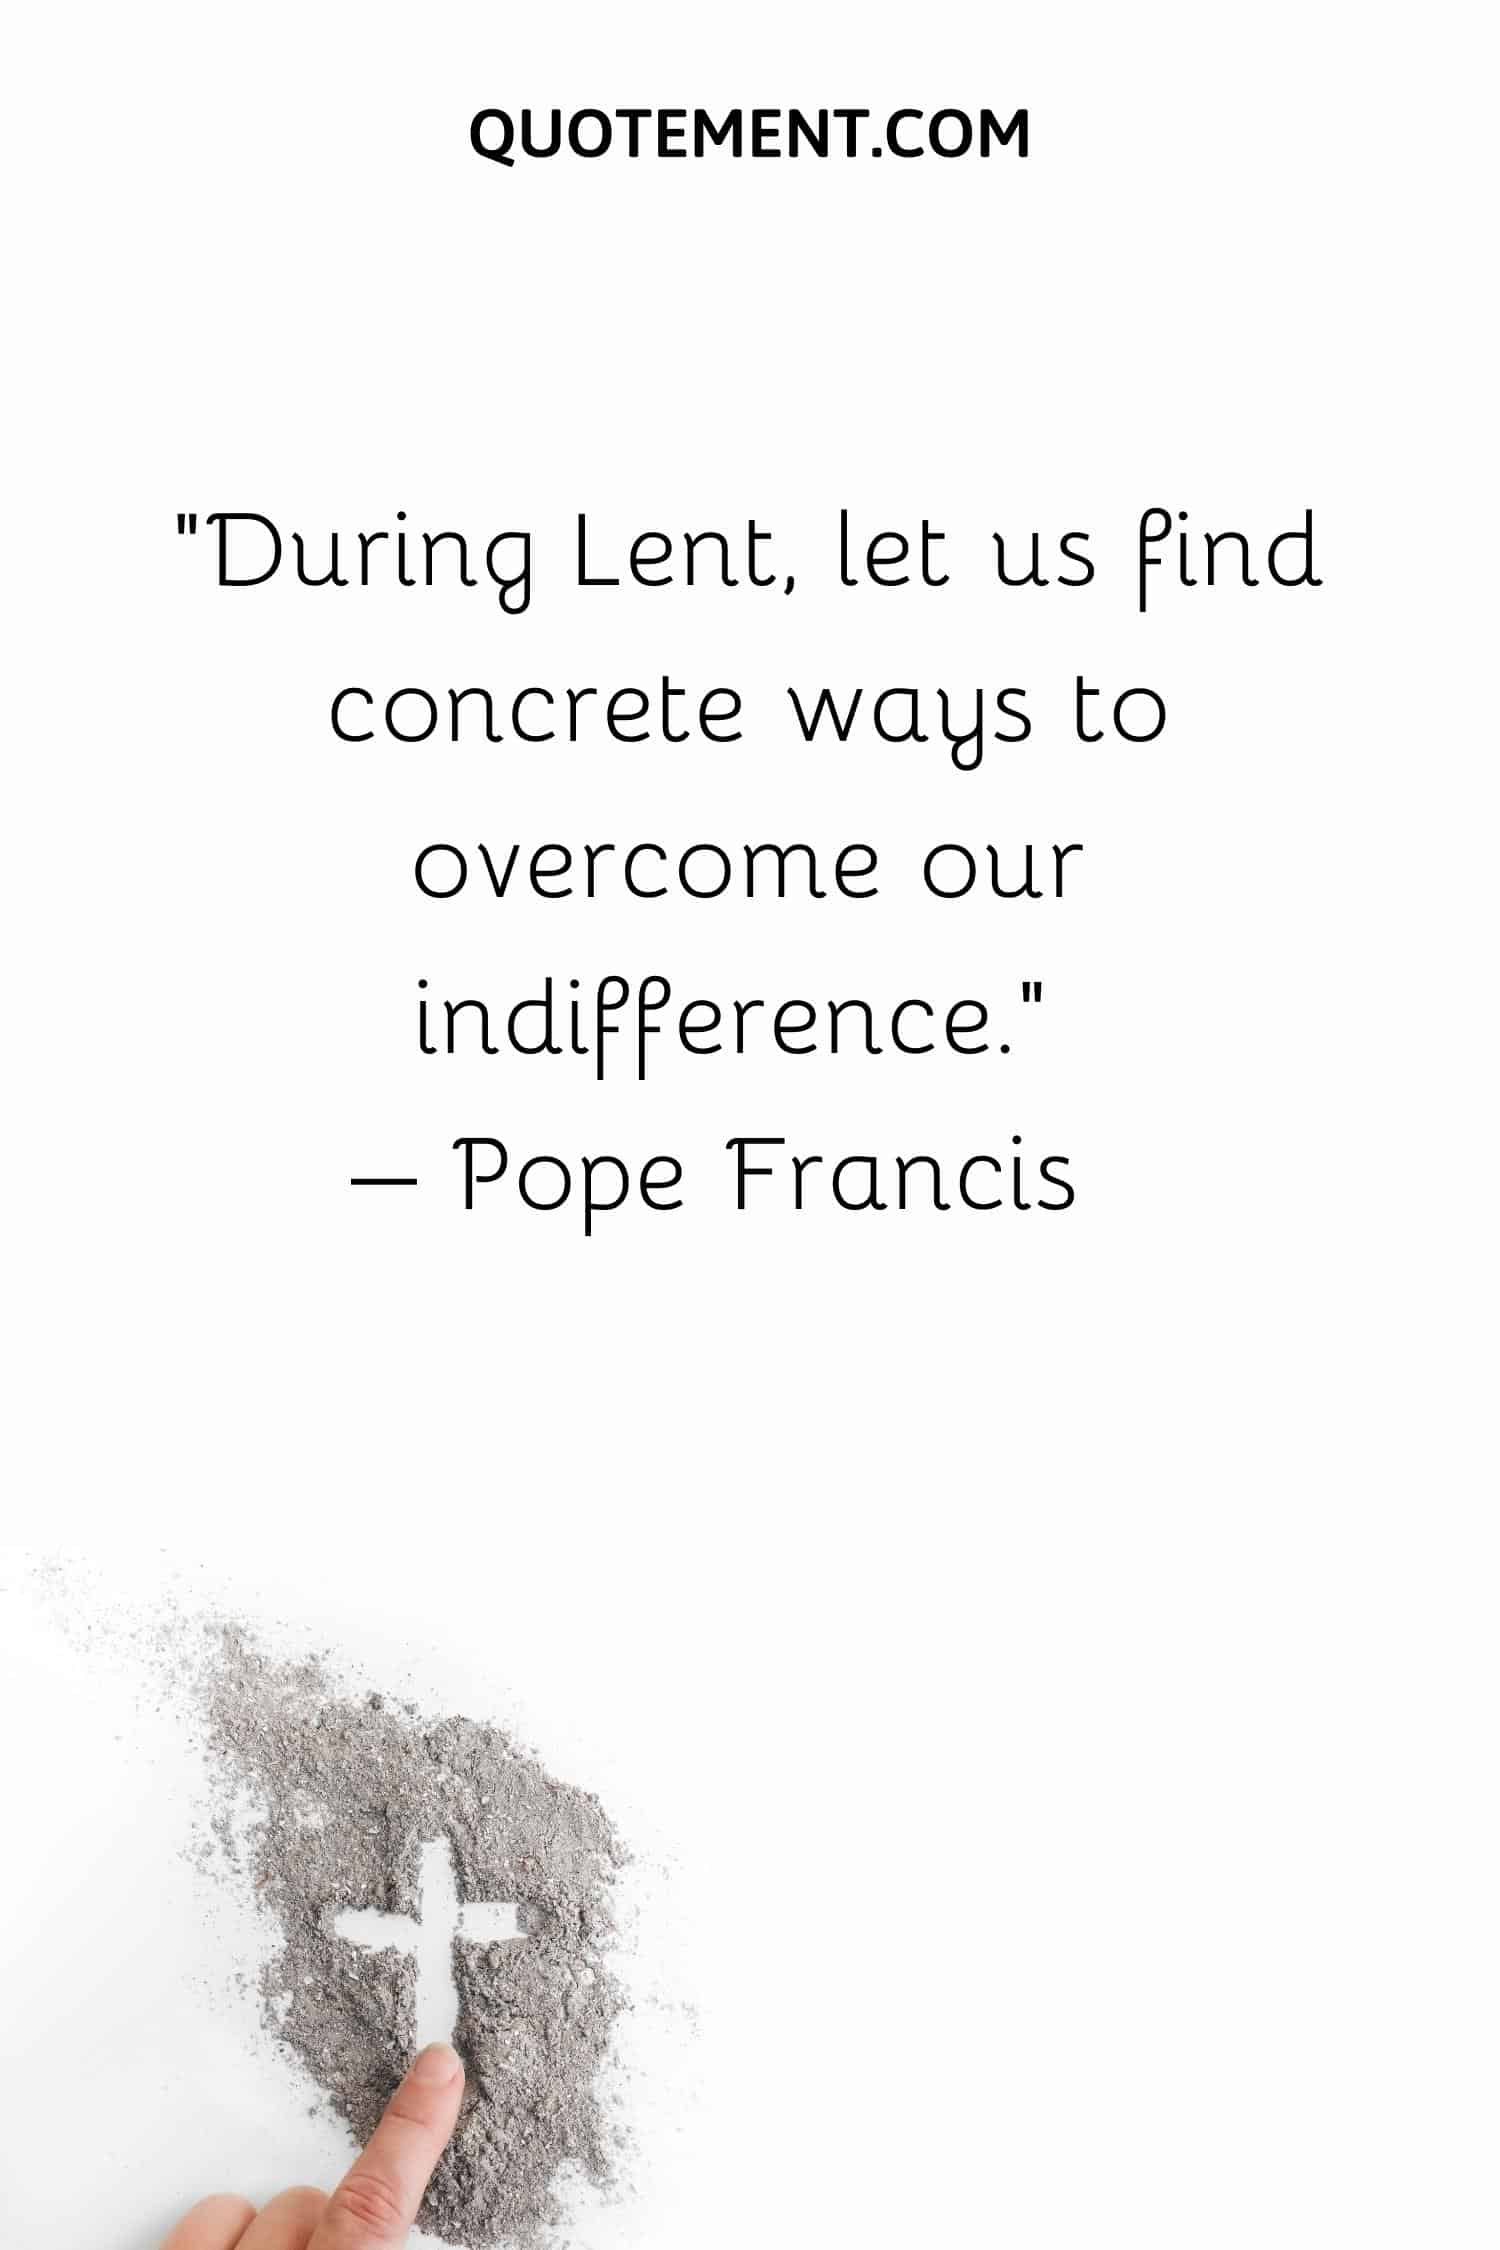 During Lent, let us find concrete ways to overcome our indifference